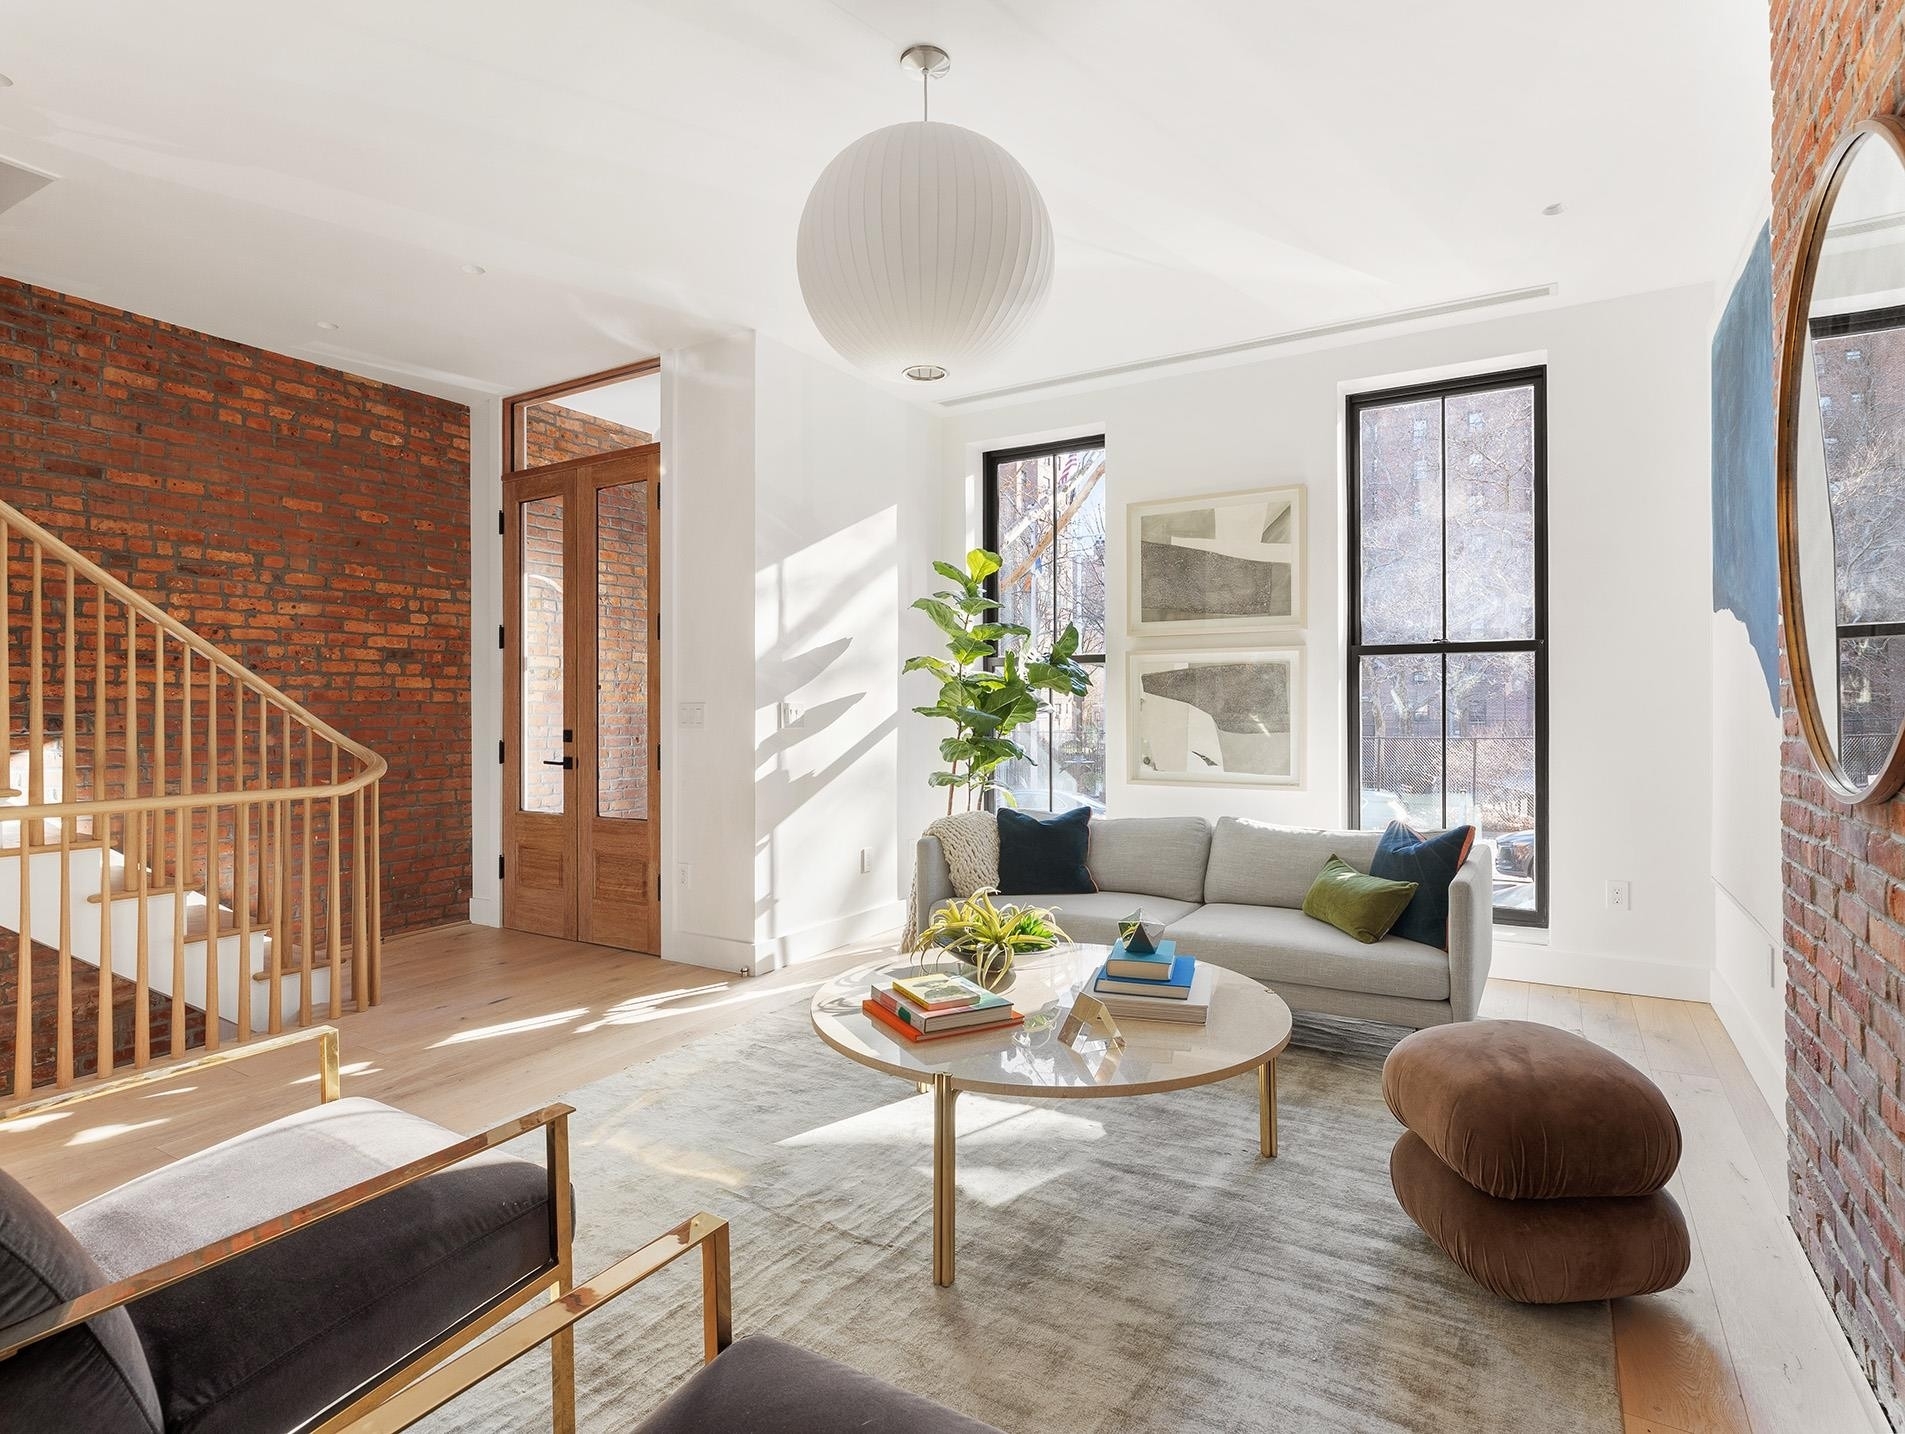 Single Family Townhouse for Sale at 153 WYCKOFF ST, TOWNHOUSE Boerum Hill, Brooklyn, New York 11217